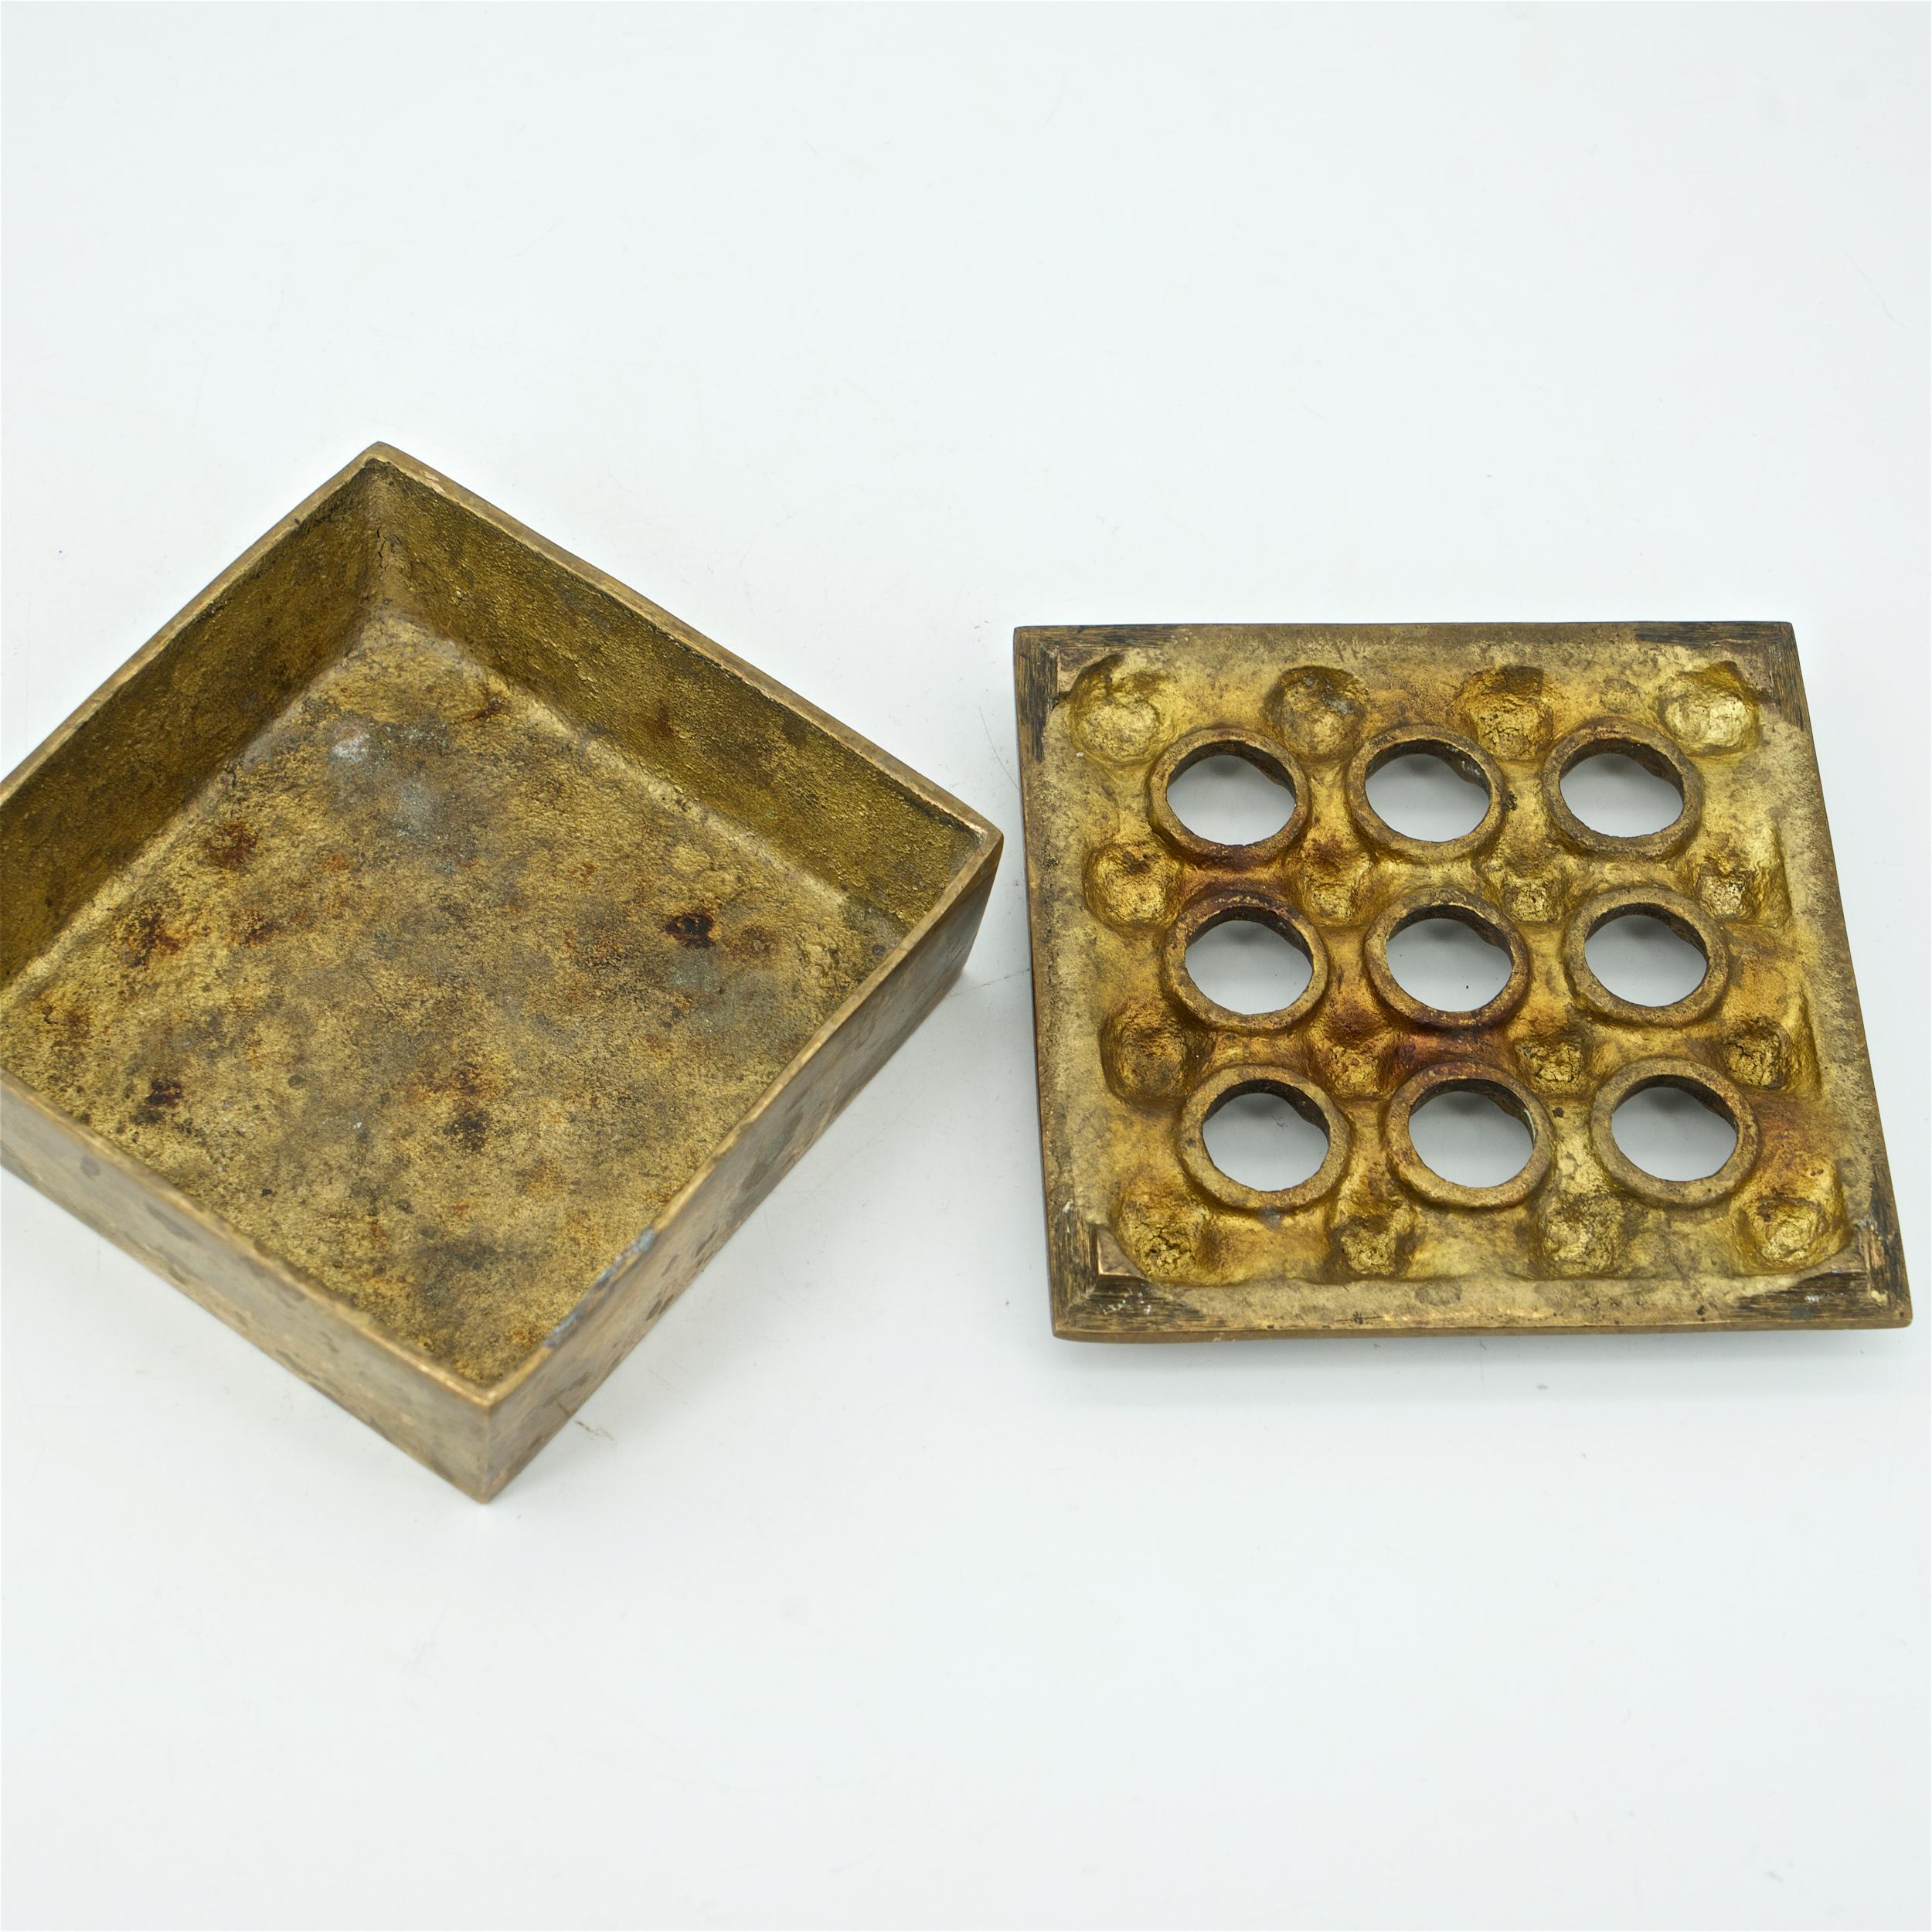 Indian Modernist Architectural Brass Table Cigar Box Ashtray Cabinmodern Egg Crate